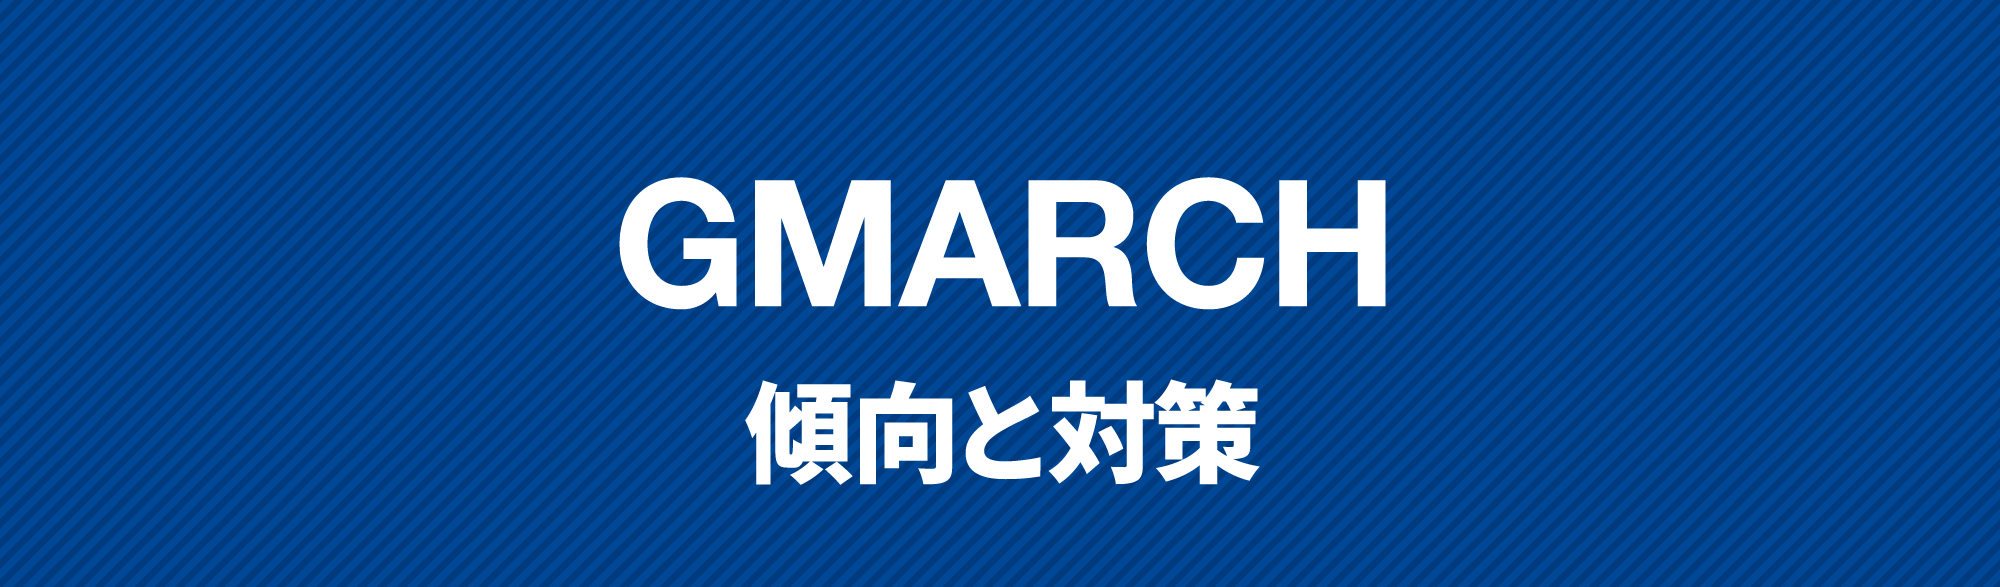 GMARCH勉強法